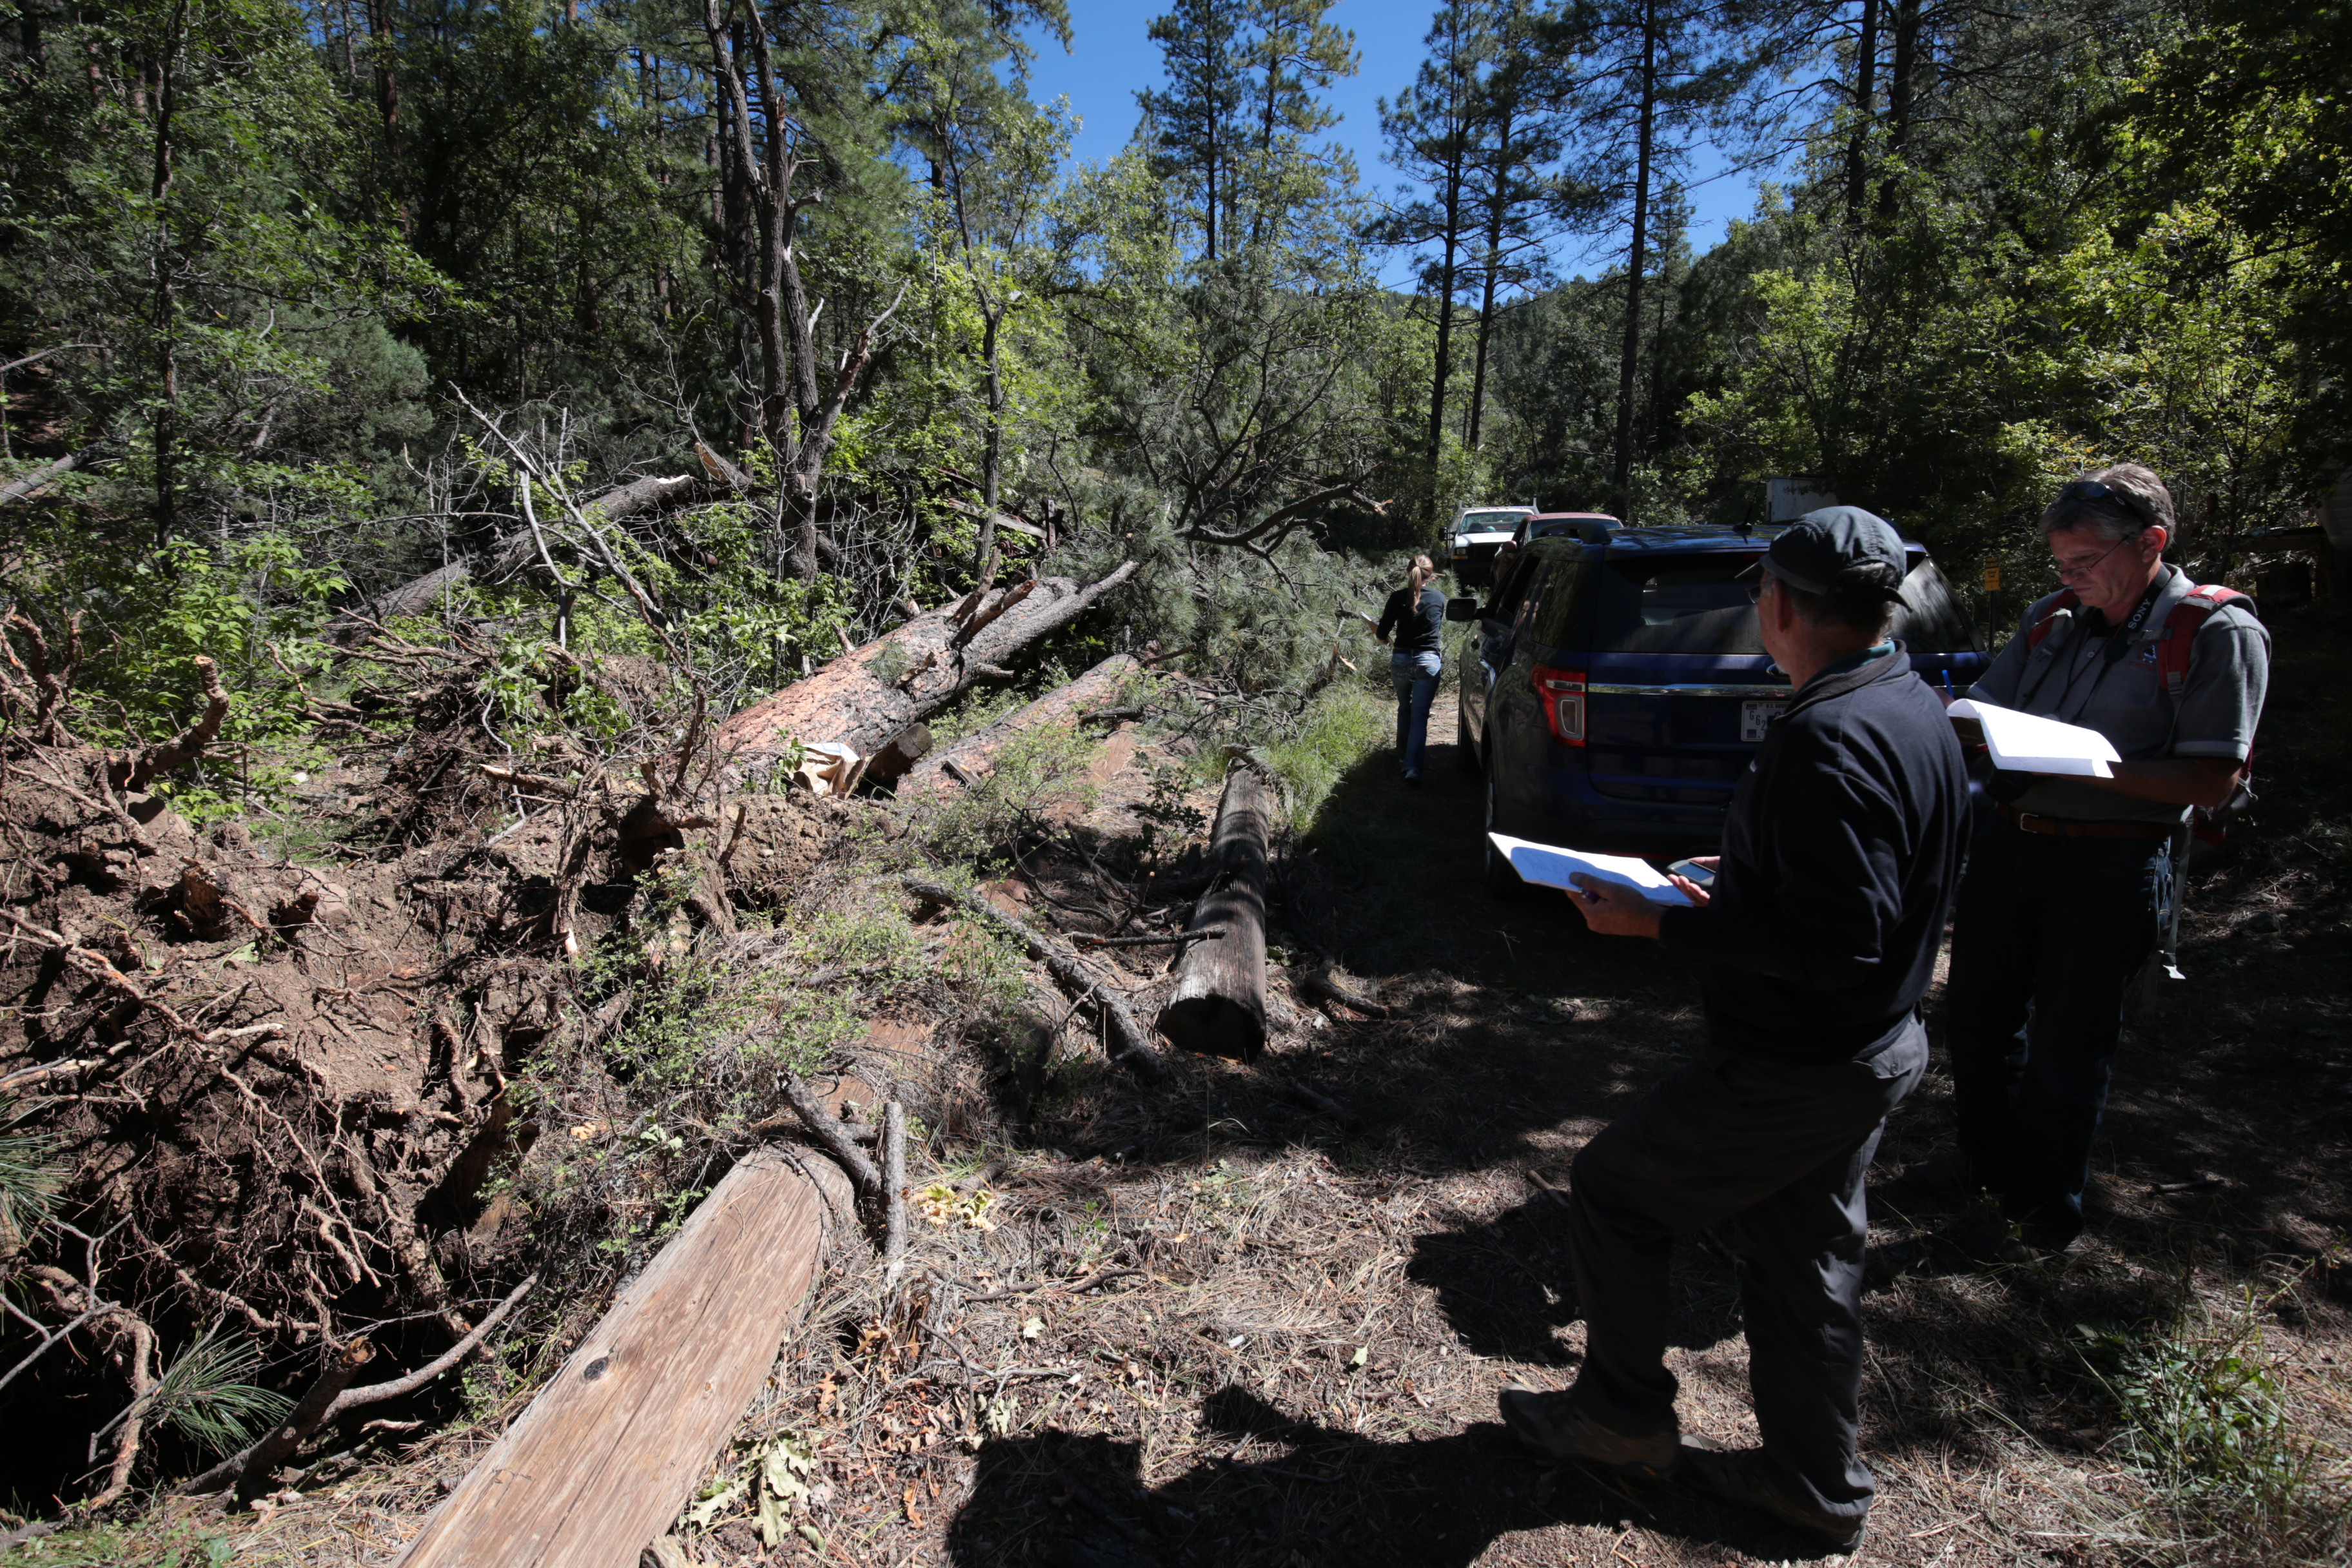 NWS Flagstaff employees assessing tree damage near Groom Creek in the Bradshaw Mountains. The assessment would rate the tornado as an EF-0.